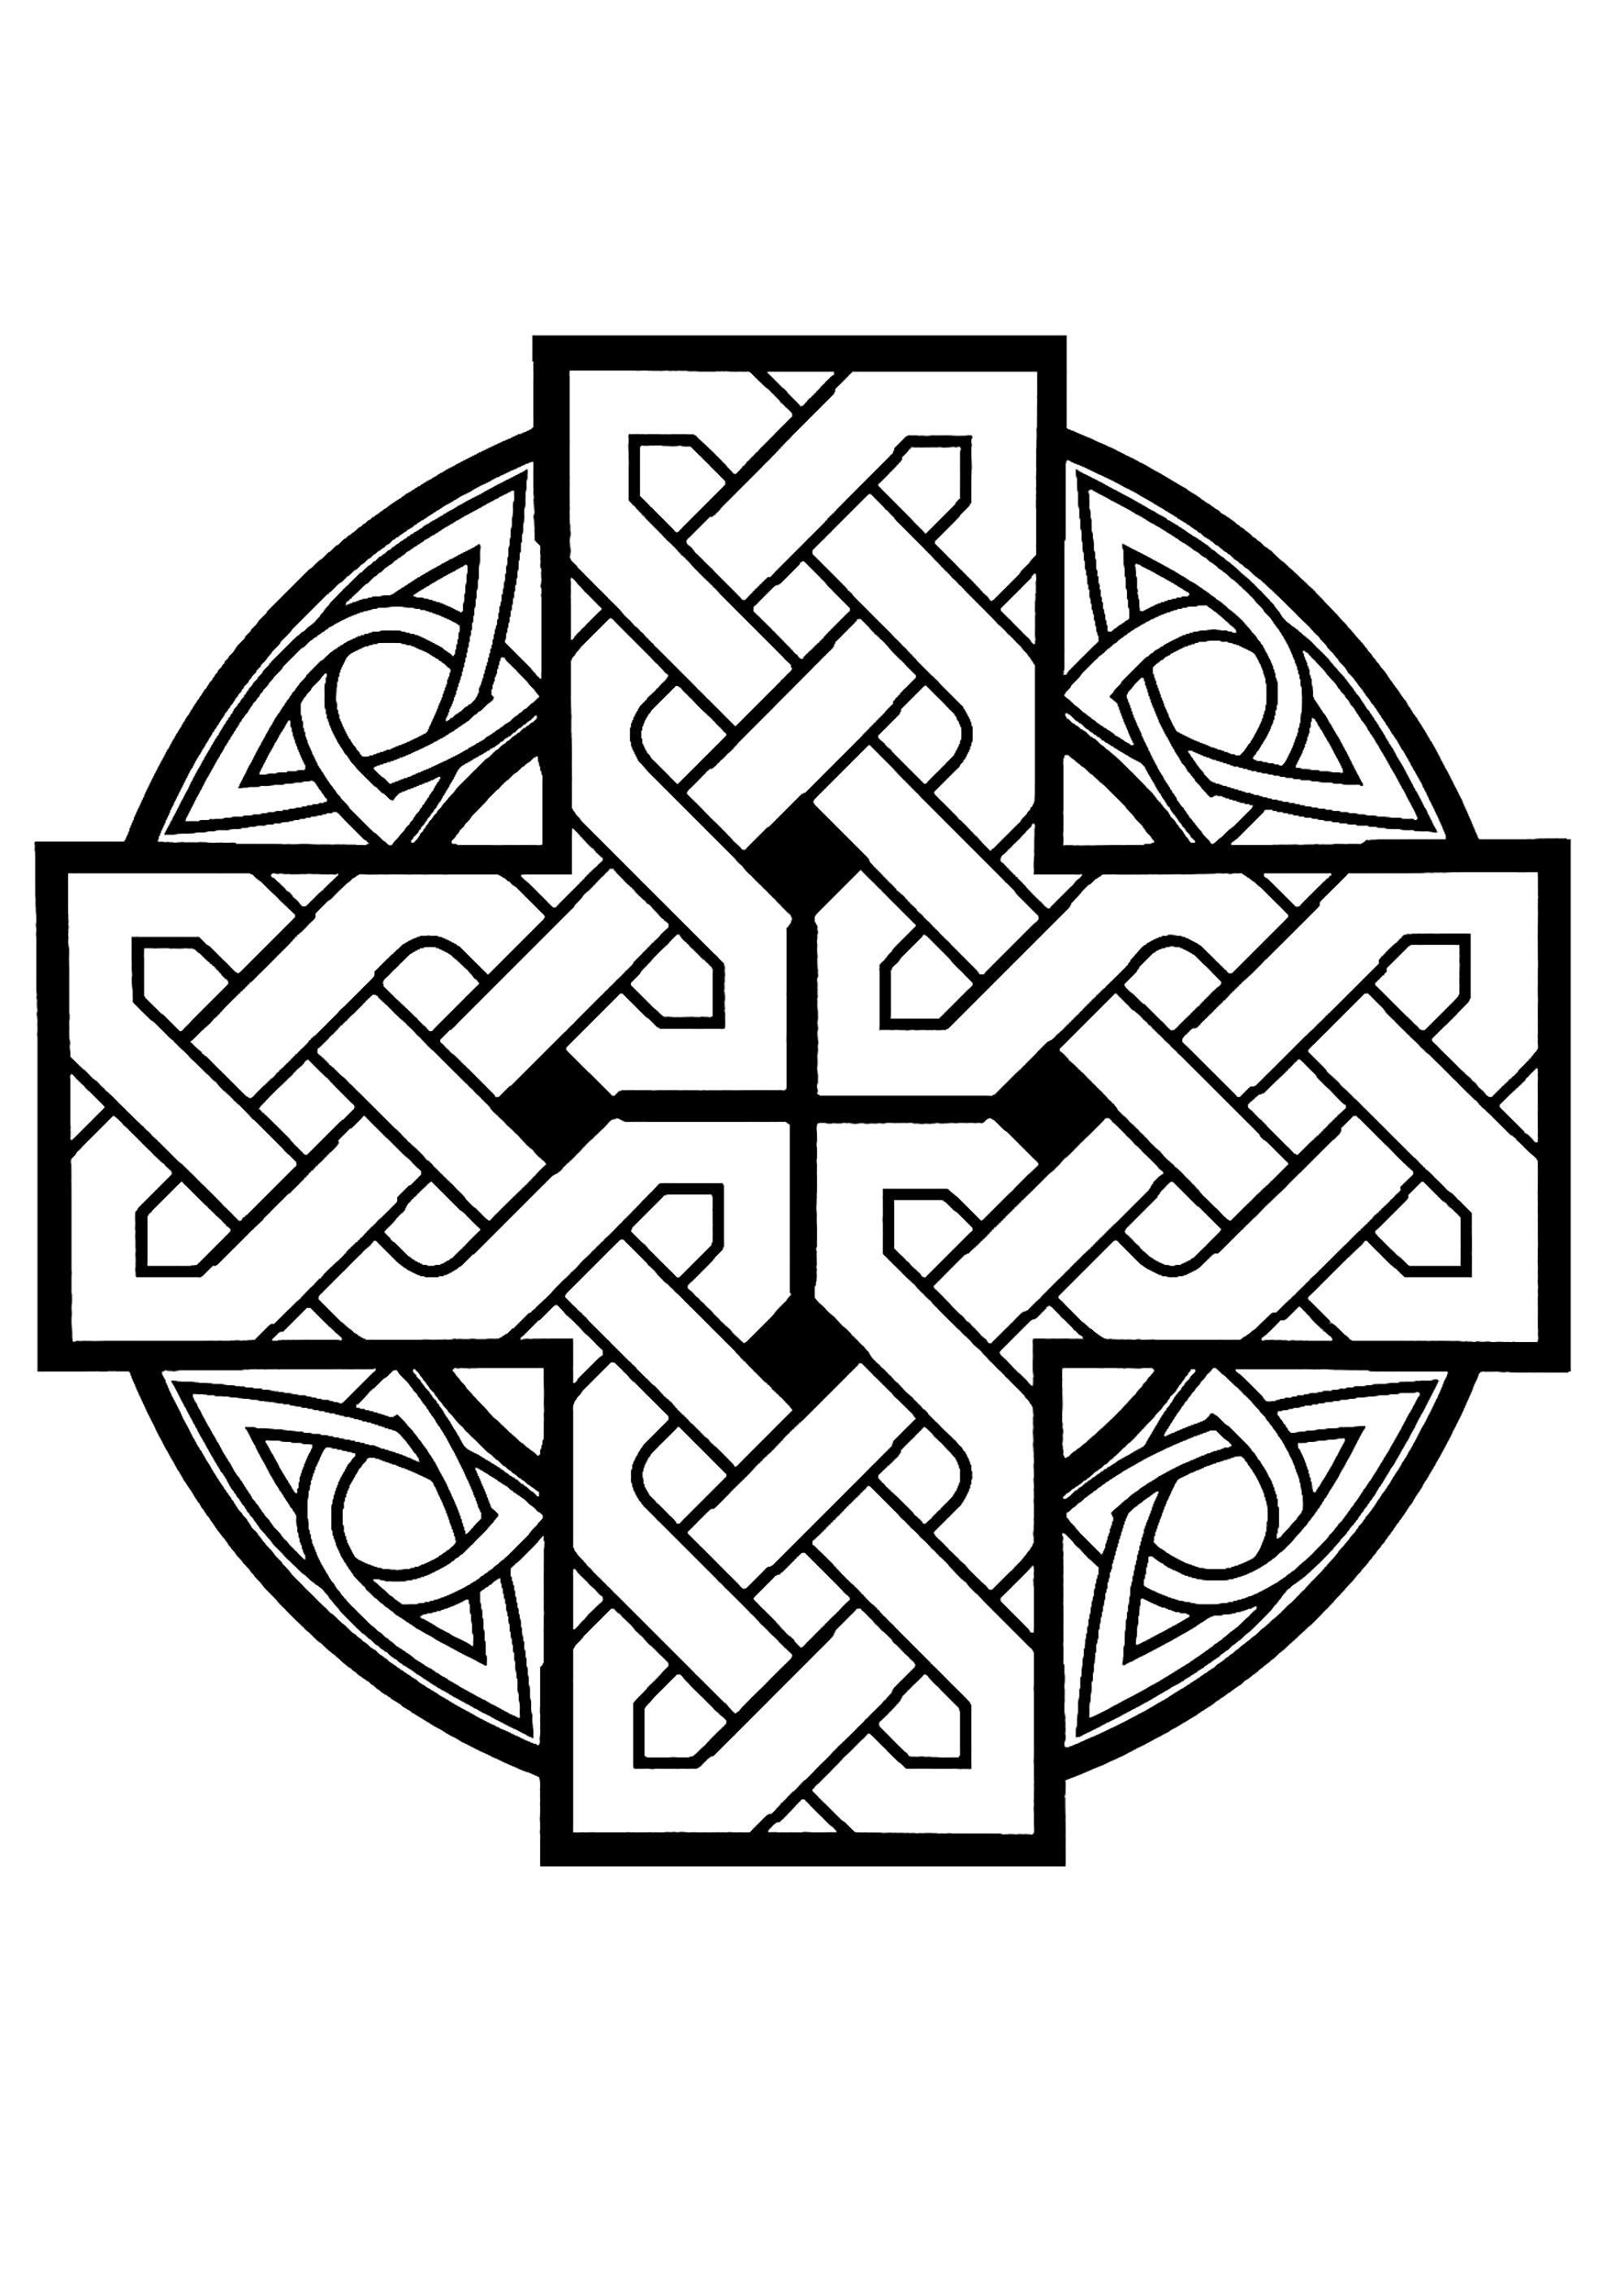 Simple celtic knot. Celtic knots are complete loops that have no start or finish and represent eternity, loyalty, faith, friendship or love. Only one thread is used in each design which symbolizes how life and eternity are interconnected. In Celtic Art, these complex designs are used as decorative accompaniments to a variety of items including jewelry sets, plates, mugs, clothing and even cutlery.